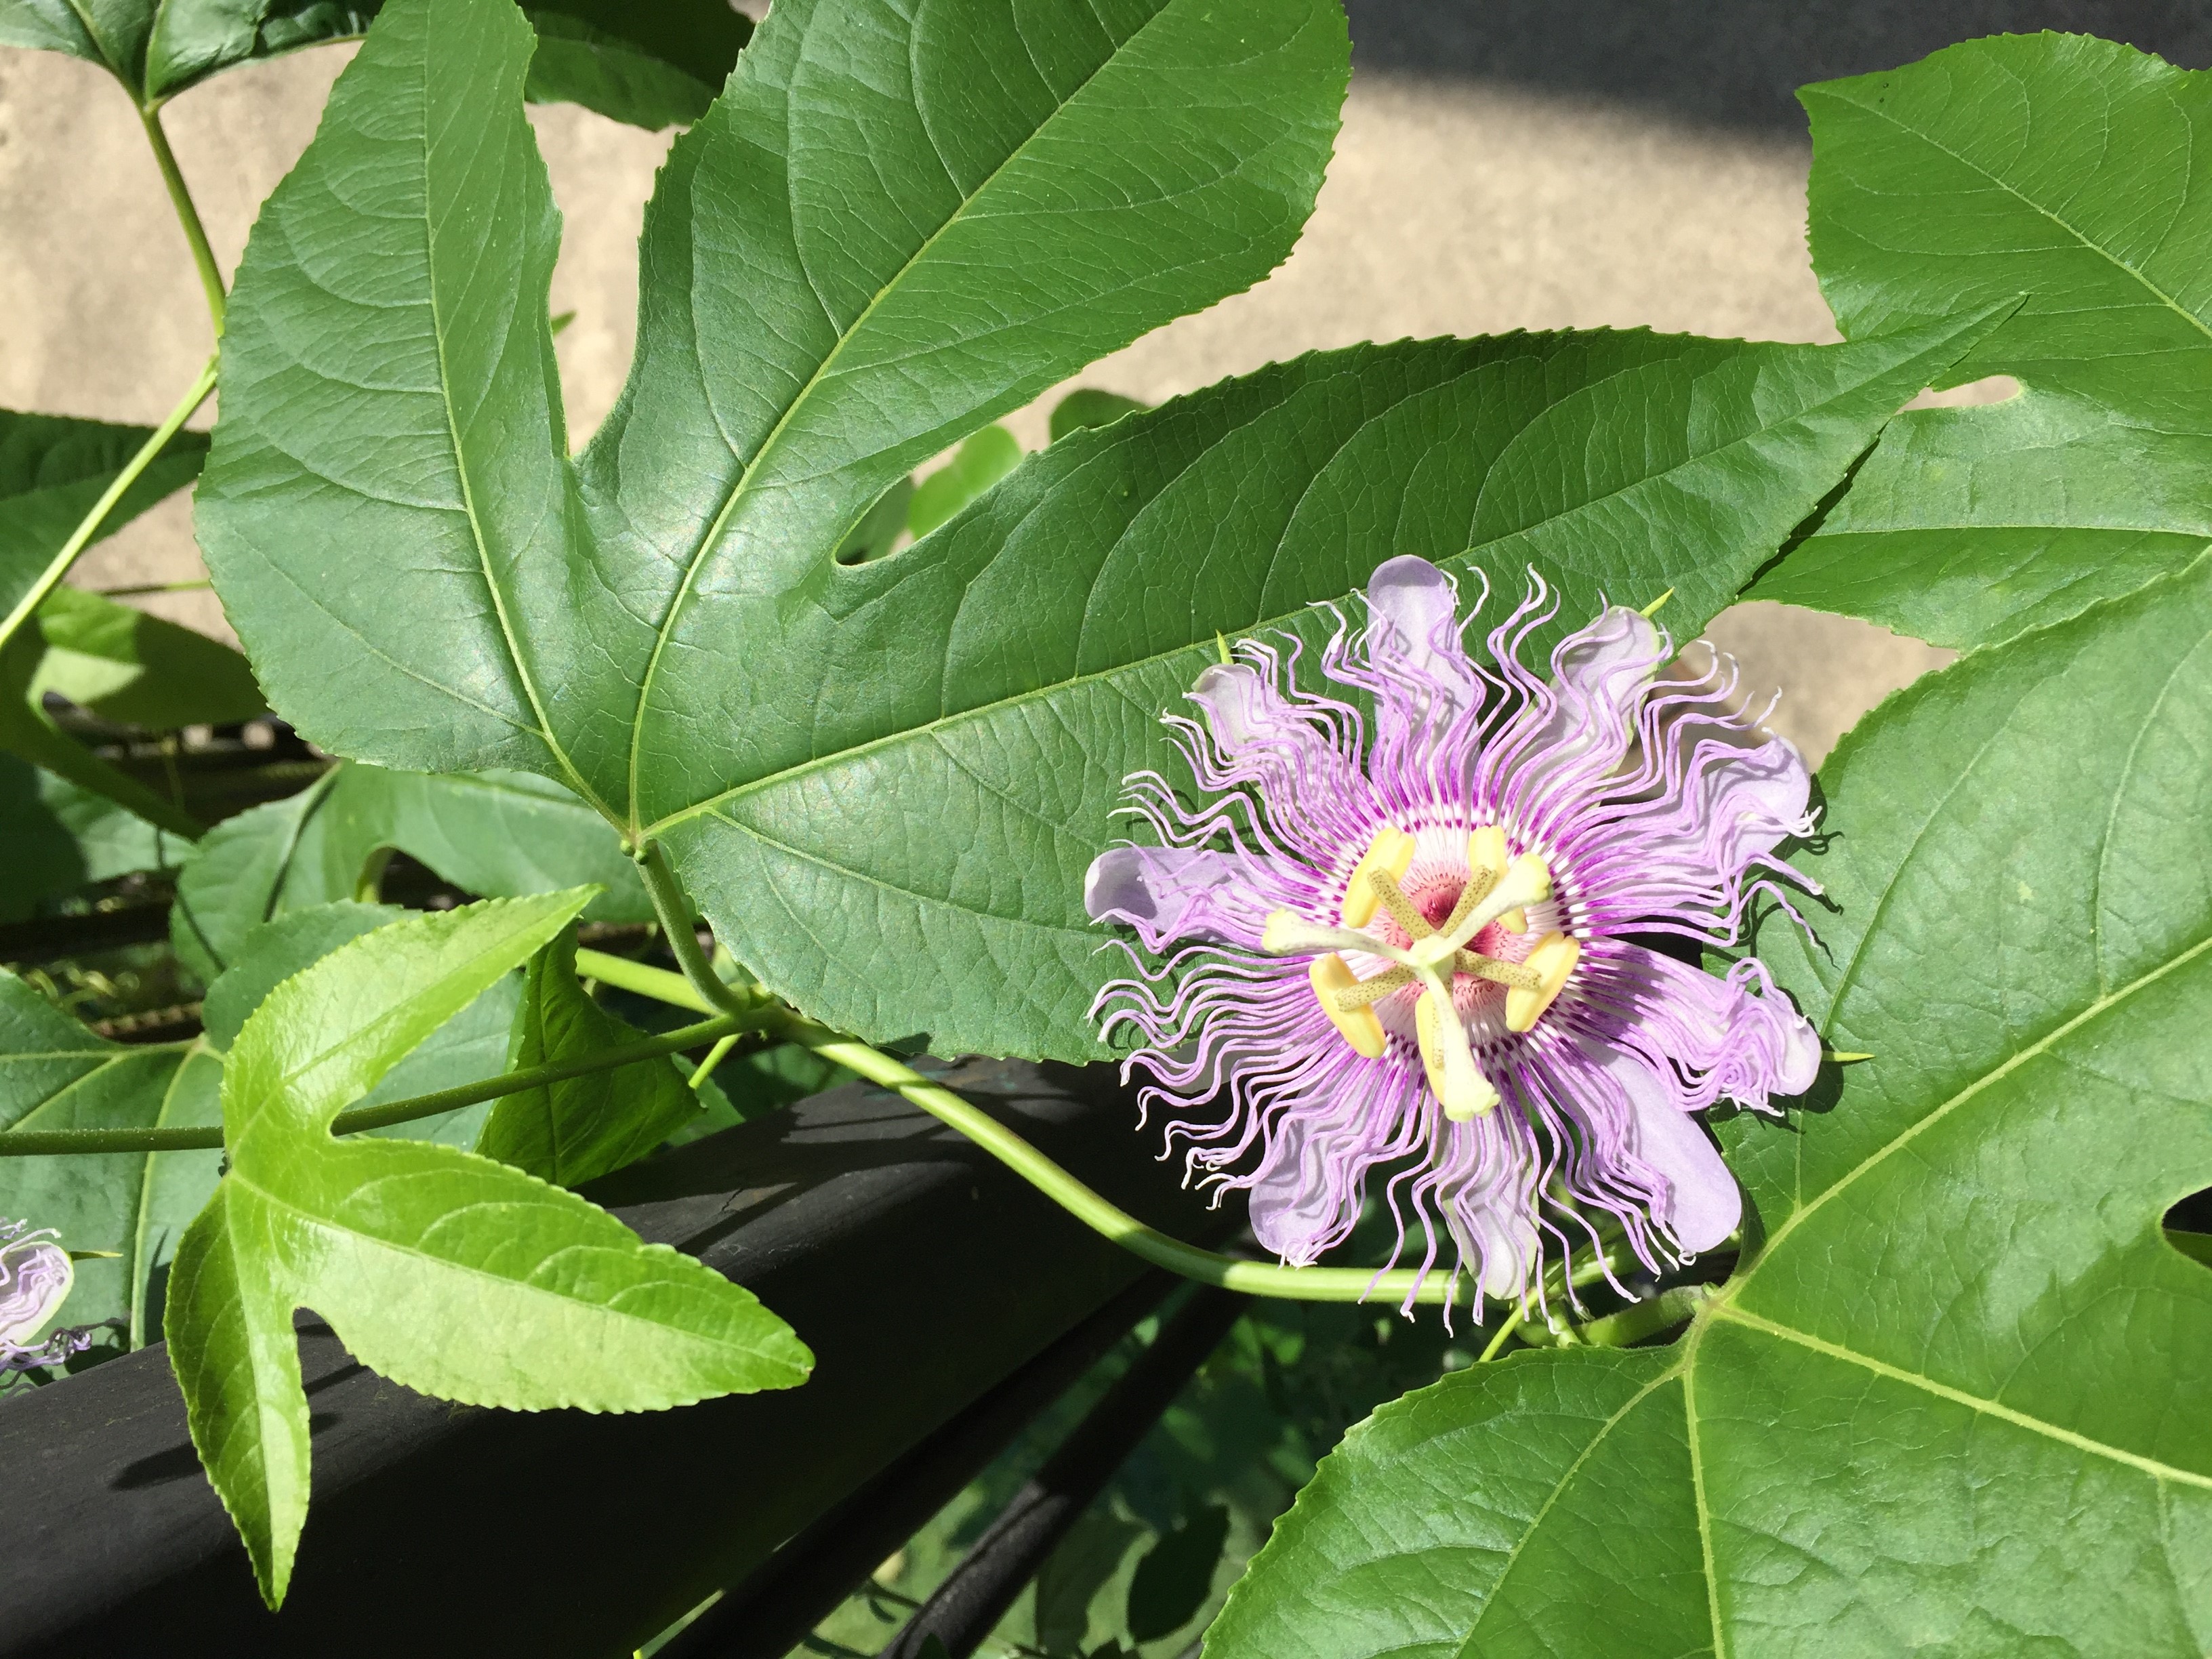 Purple passion flower blooming on my deck at home in Collinsville, IL. Photo by Gayle Fritz.